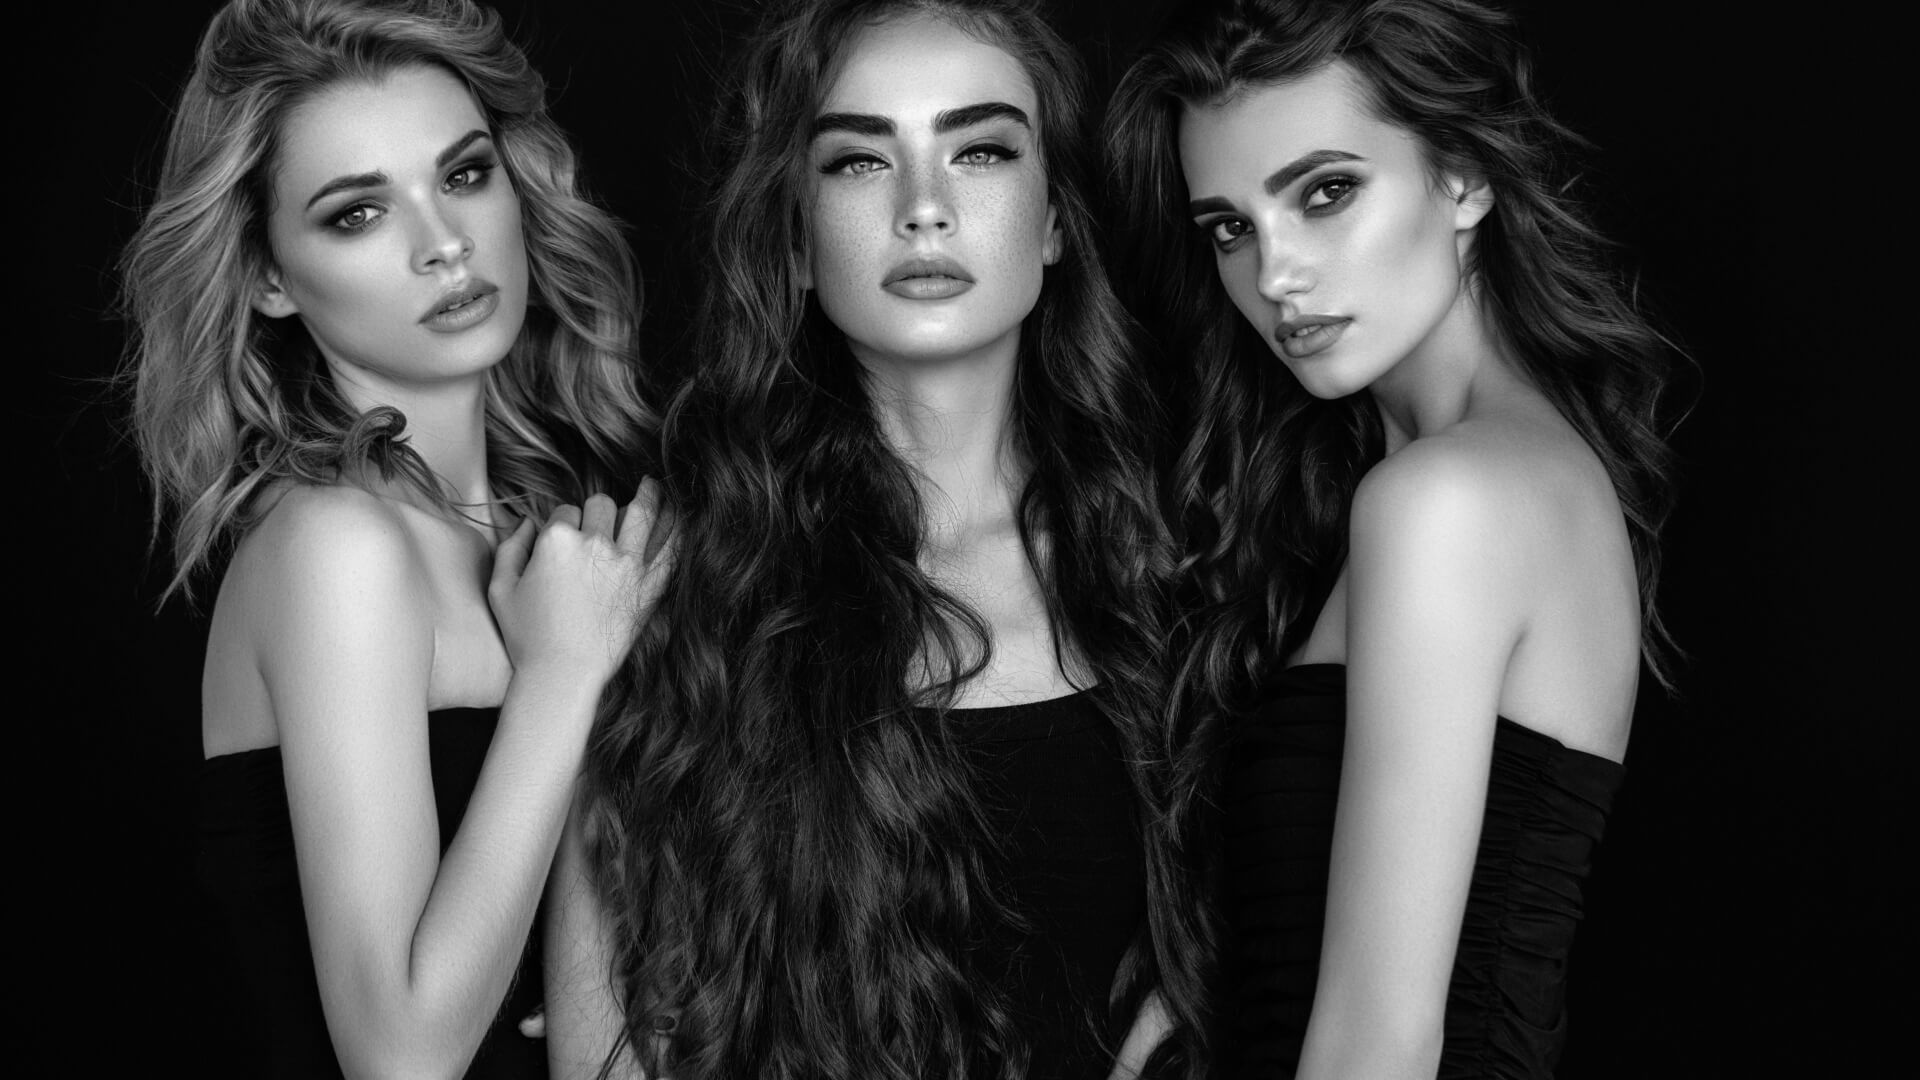 Black and white photo of 3 models